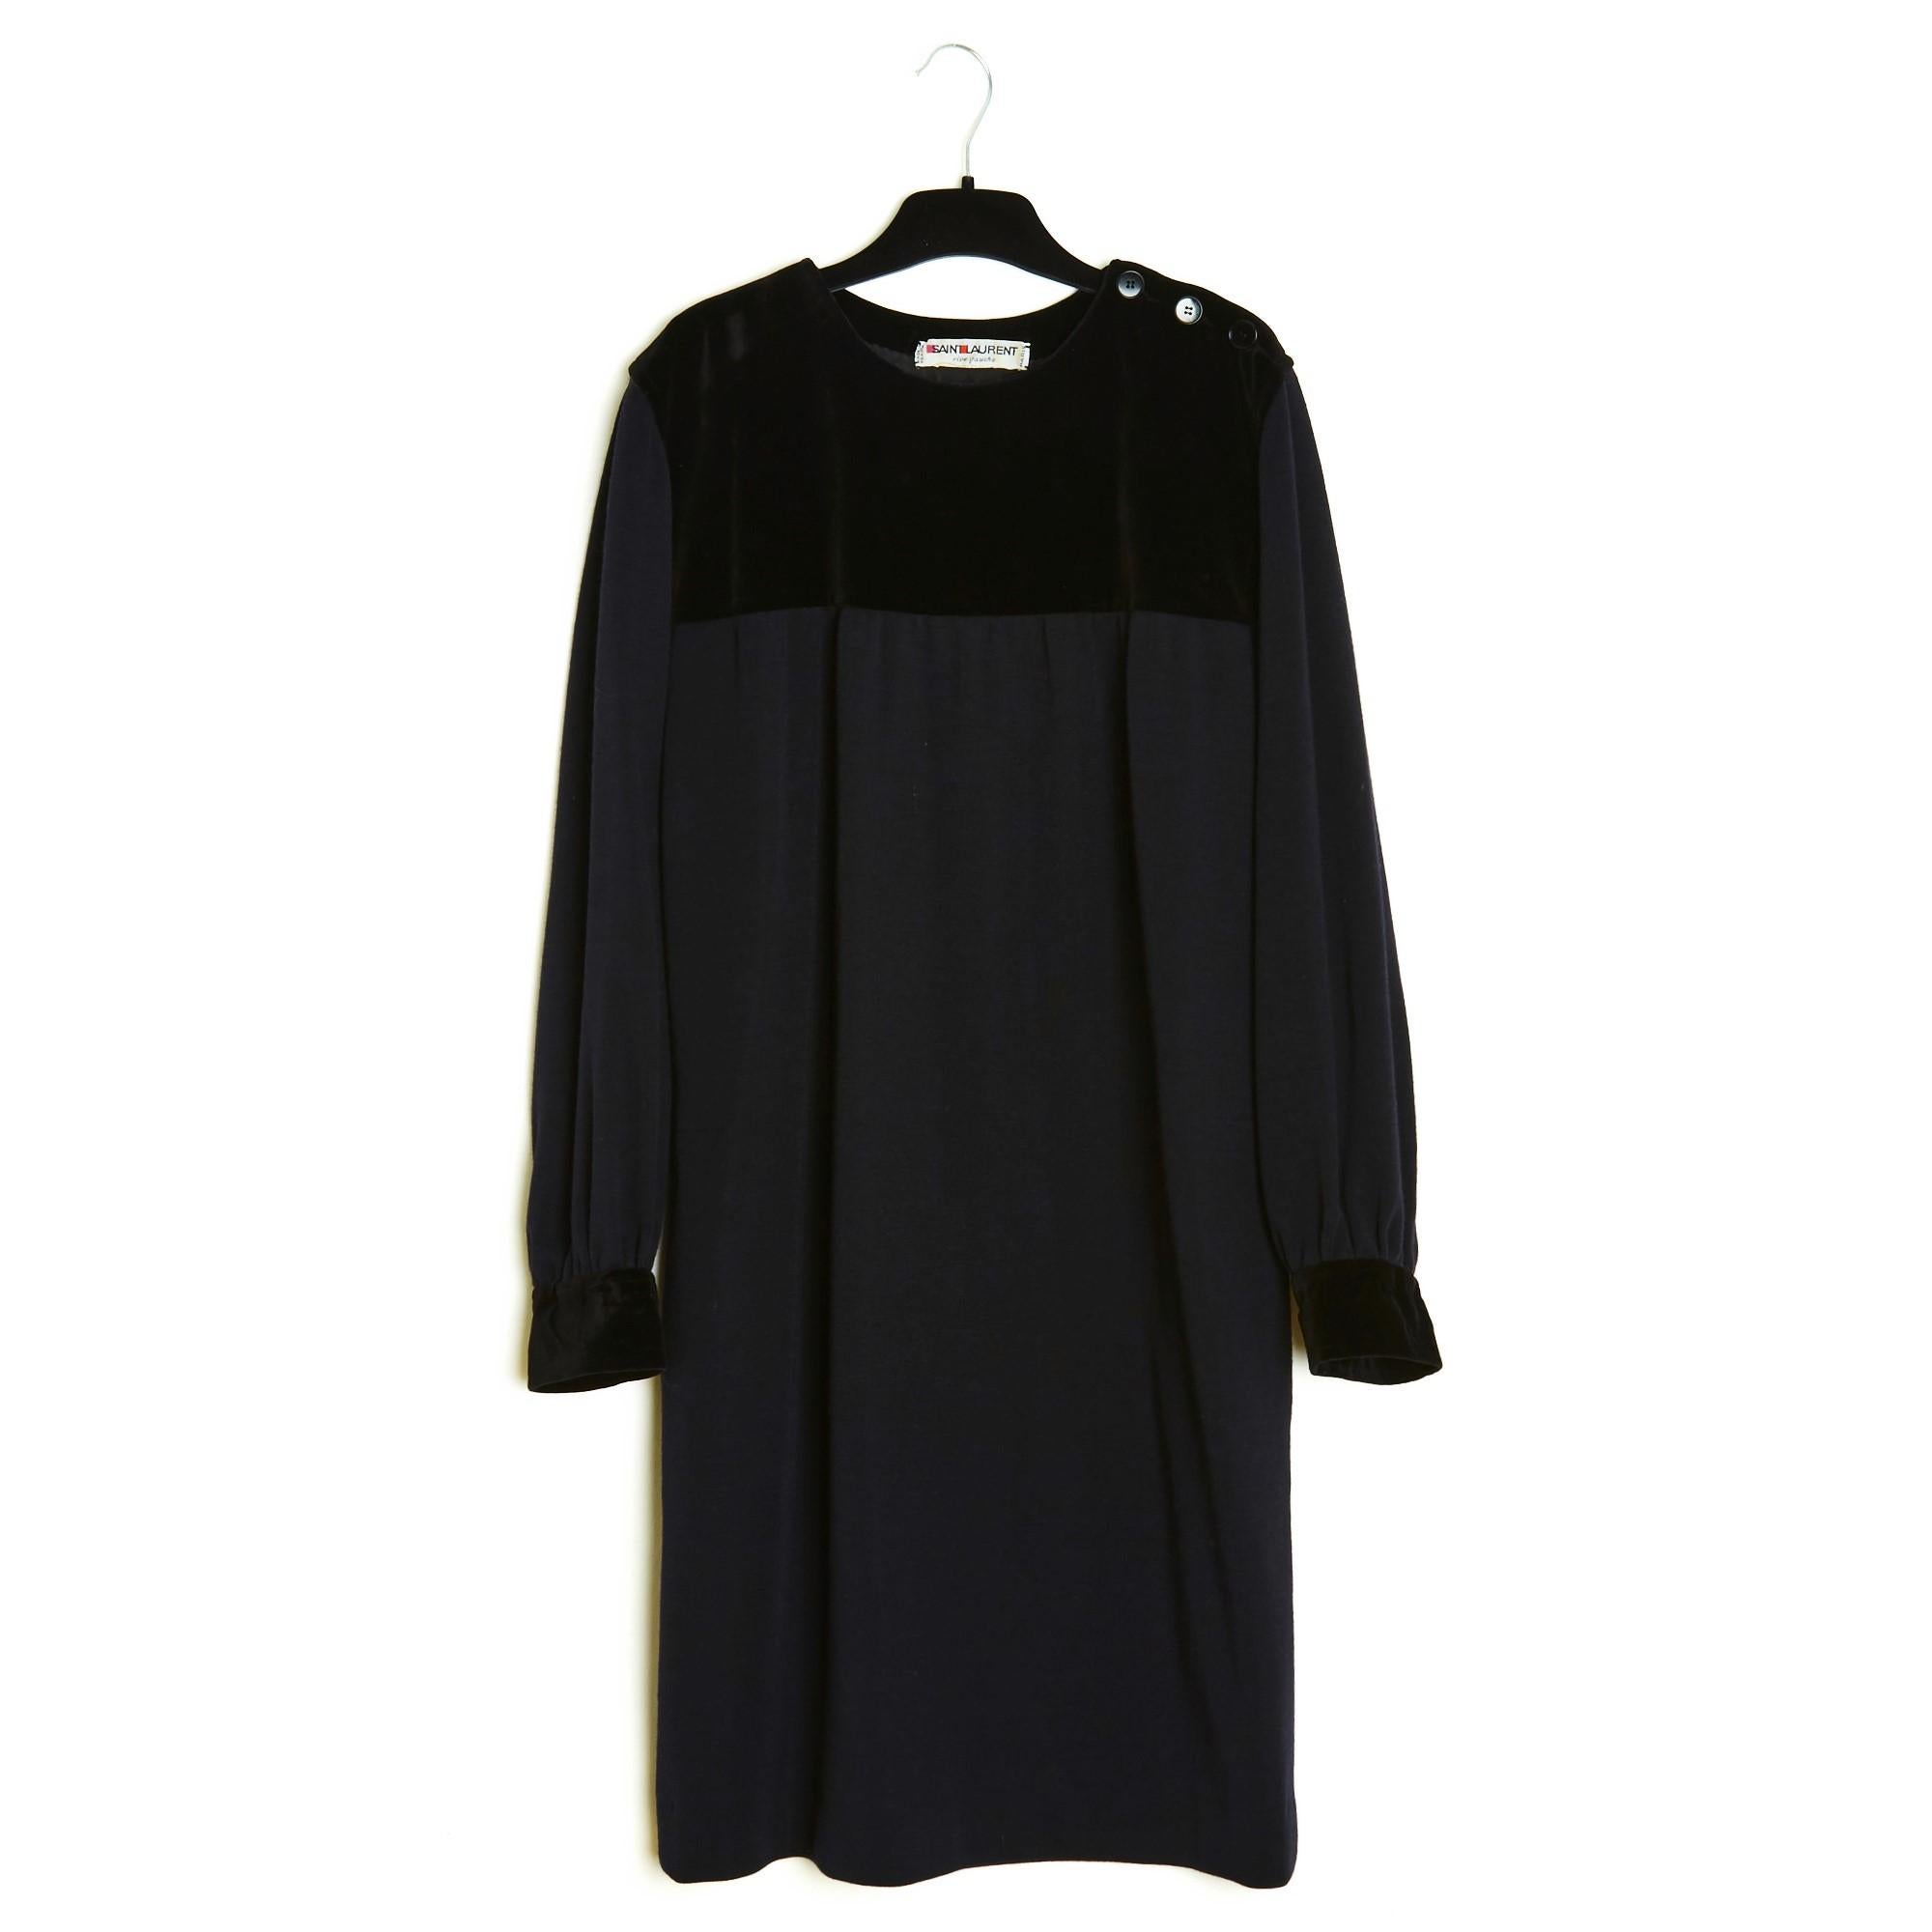 Yves Saint Laurent Rive Gauche dress in black wool jersey, round collar closed with 3 buttons on the shoulder and smooth velvet yoke on the upper bust and shoulders, straight cut with 2 slit pockets on the sides, long sleeves tightened by a velvet